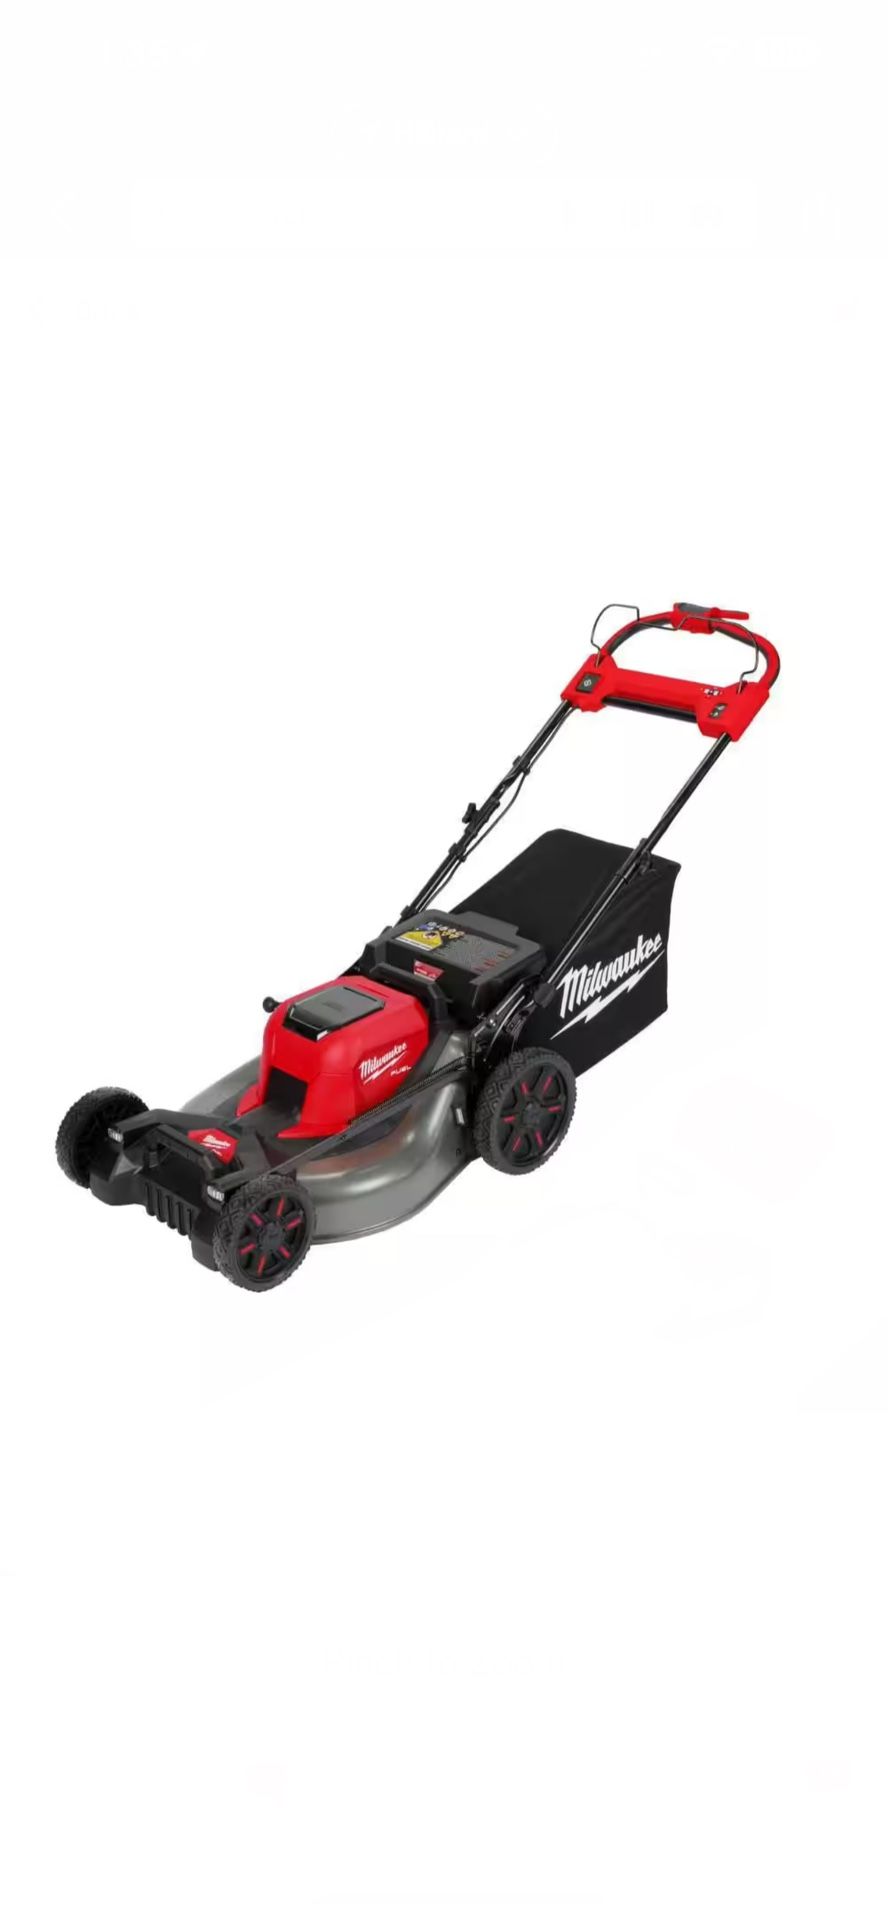 New Milwaukee M18 FUEL Brushless Cordless 21 in. Walk Behind Dual Battery Self-Propelled Mower Bare Tool $600 Firm